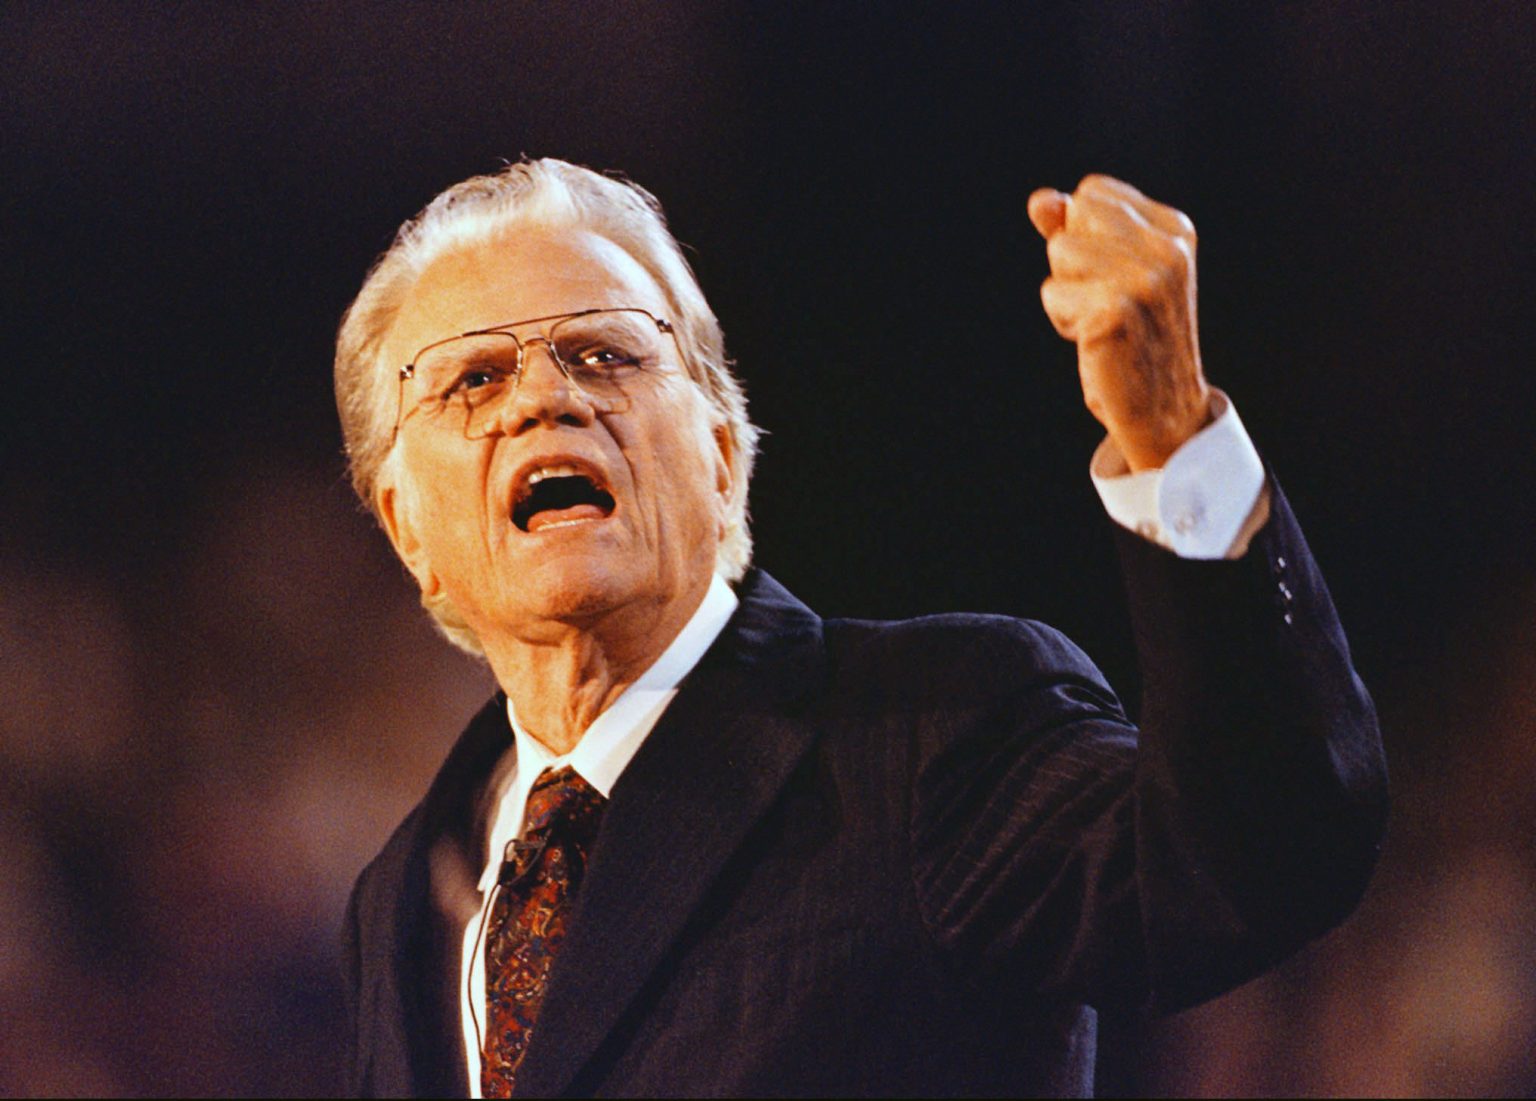 DOWNLOAD MP3: The Brevity of Time by Evangelist BILLY GRAHAM (Sermon) 1